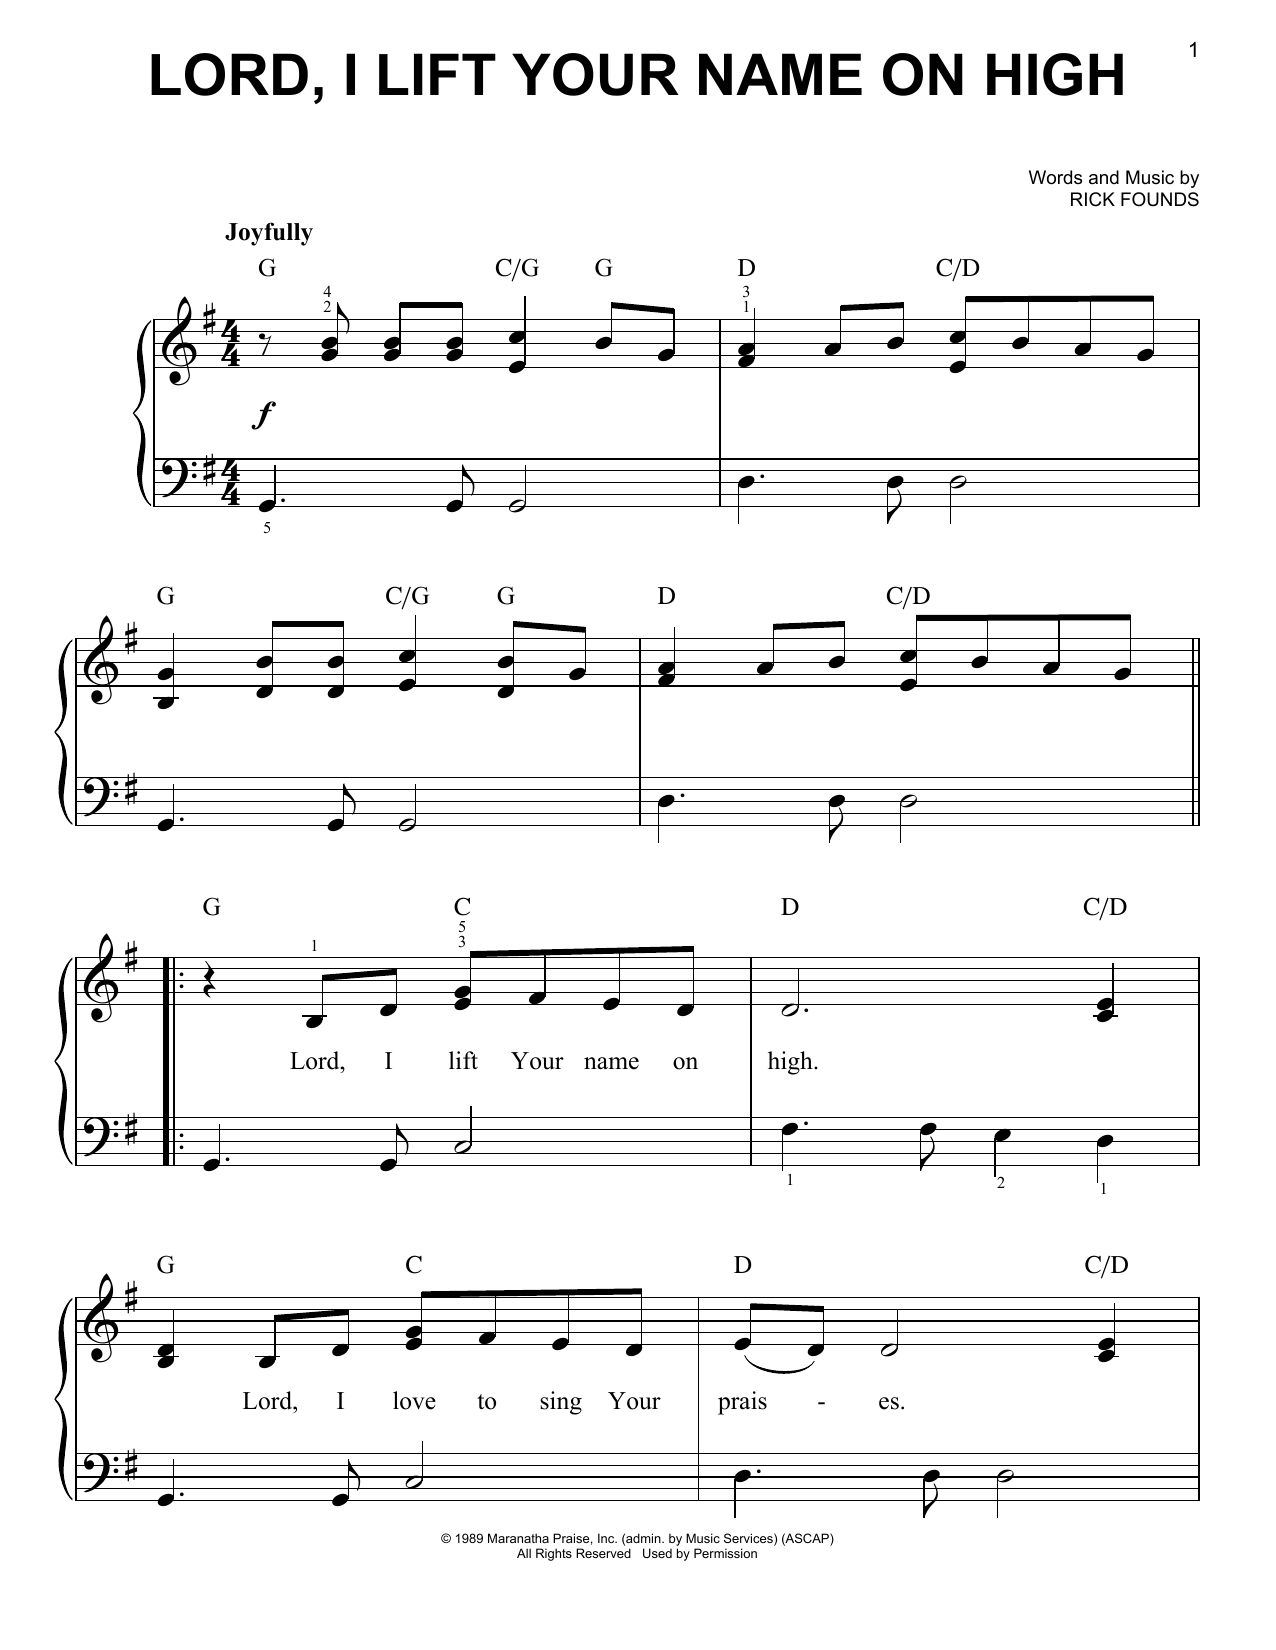 Lord I Lift Your Name On High Chords Rick Founds Lord I Lift Your Name On High Sheet Music Notes Chords Download Printable Easy Piano Sku 91272